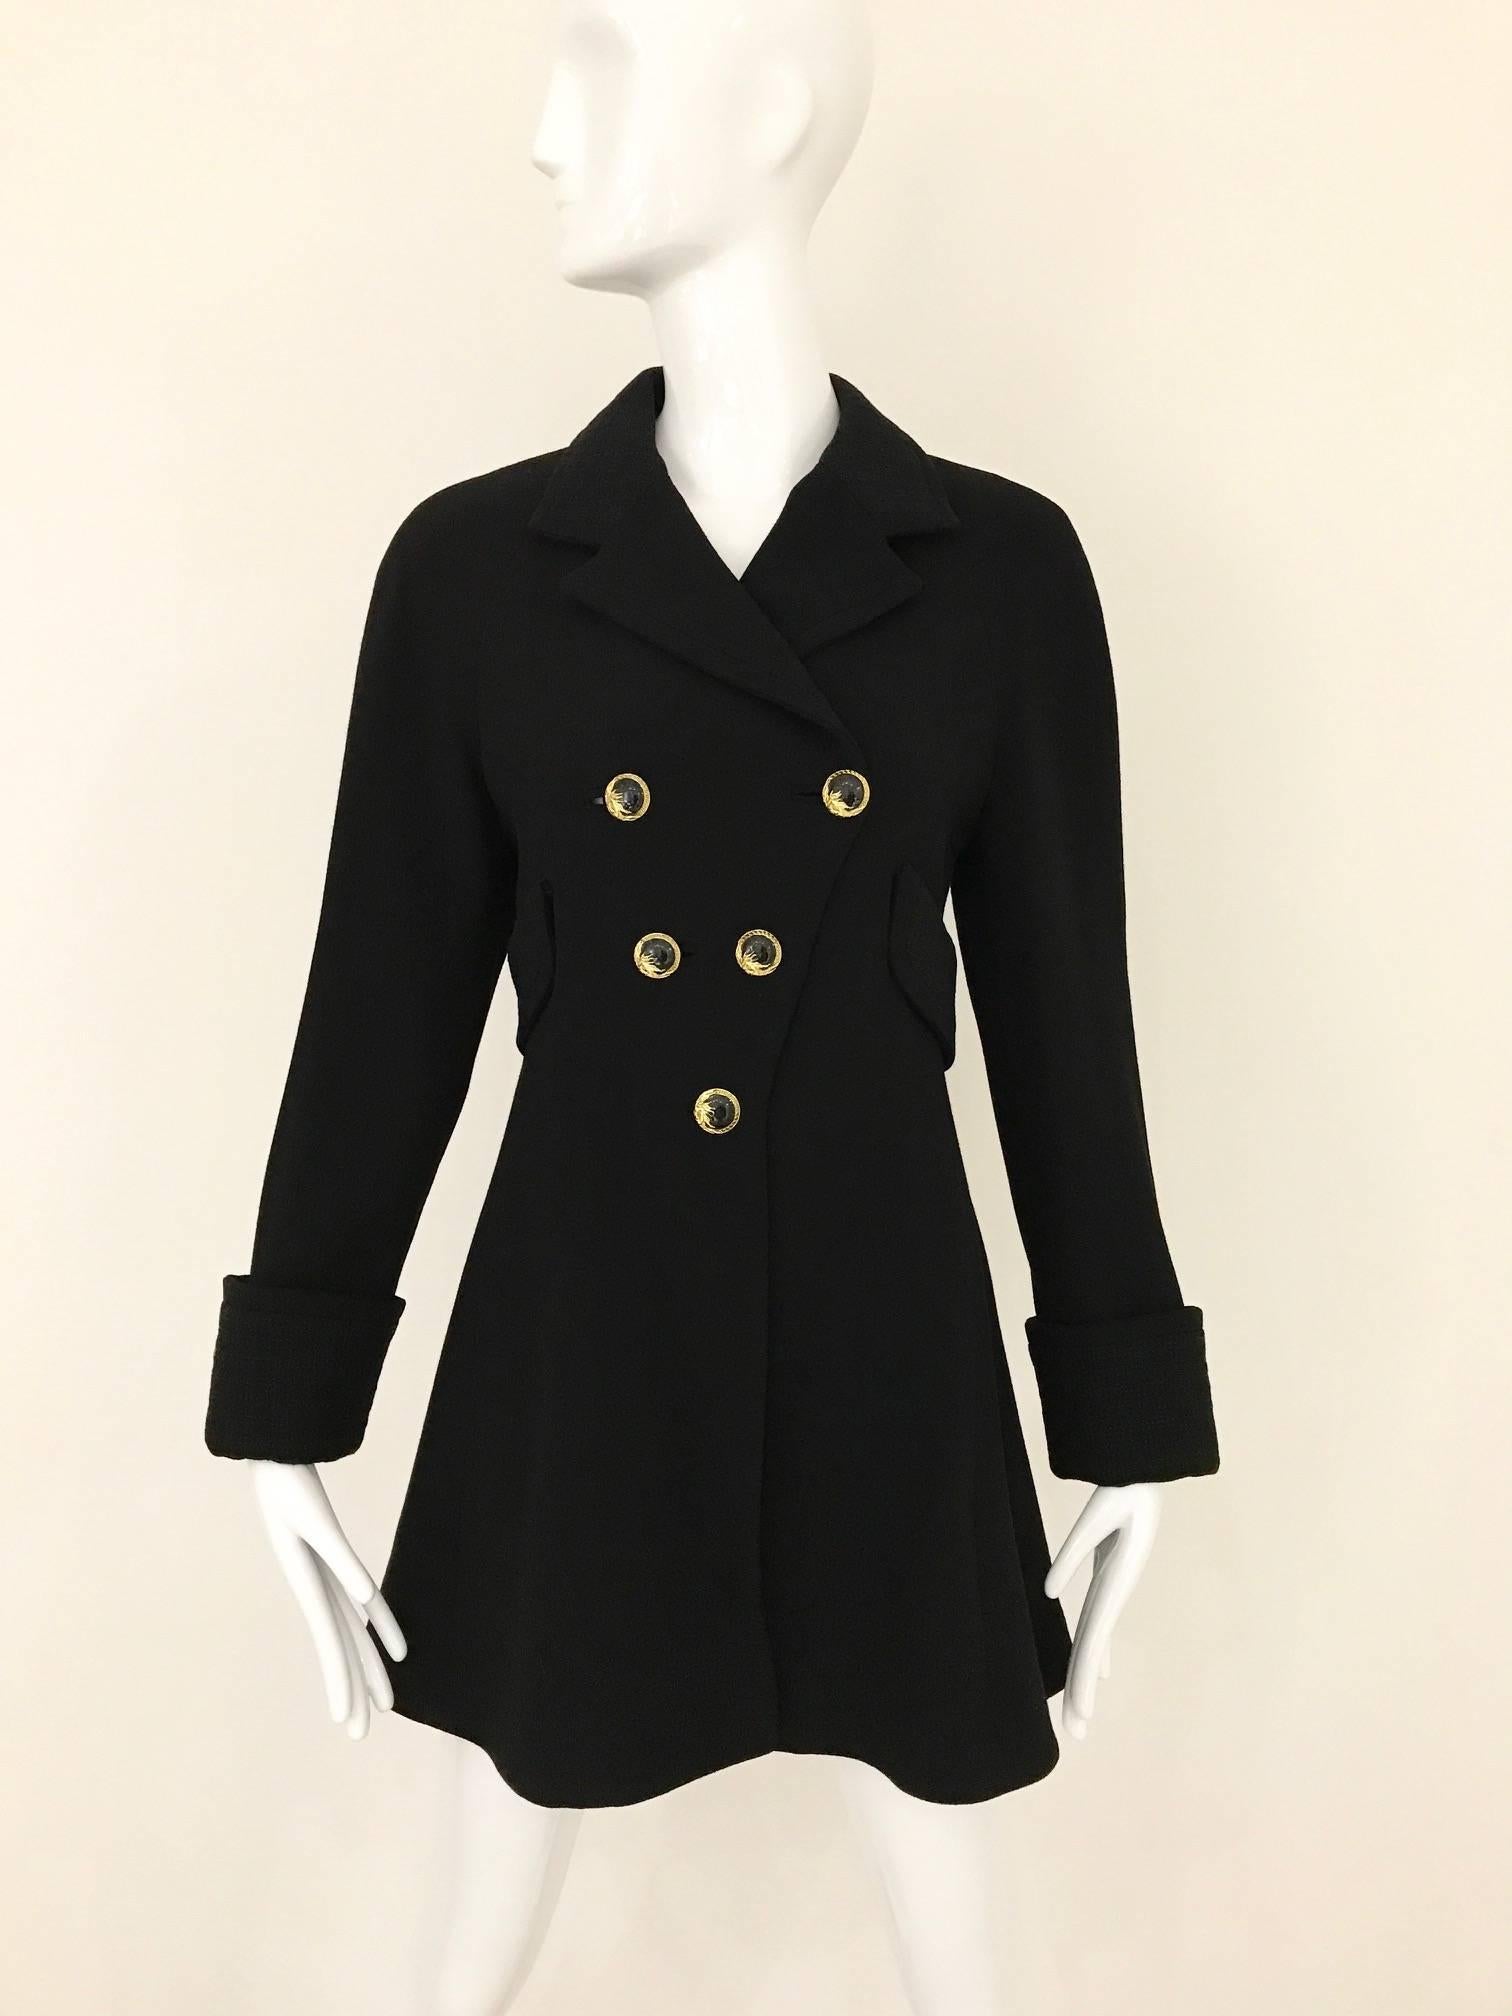 1990s Vintage Gianni Versace Couture label black crepe peacoat jacket lined in plaid silk. Slightly A line 2 side pockets, coat or jacket finish with gold and black enamel gianni versace button. Very flattering coat/ jacket.
Fit size :4